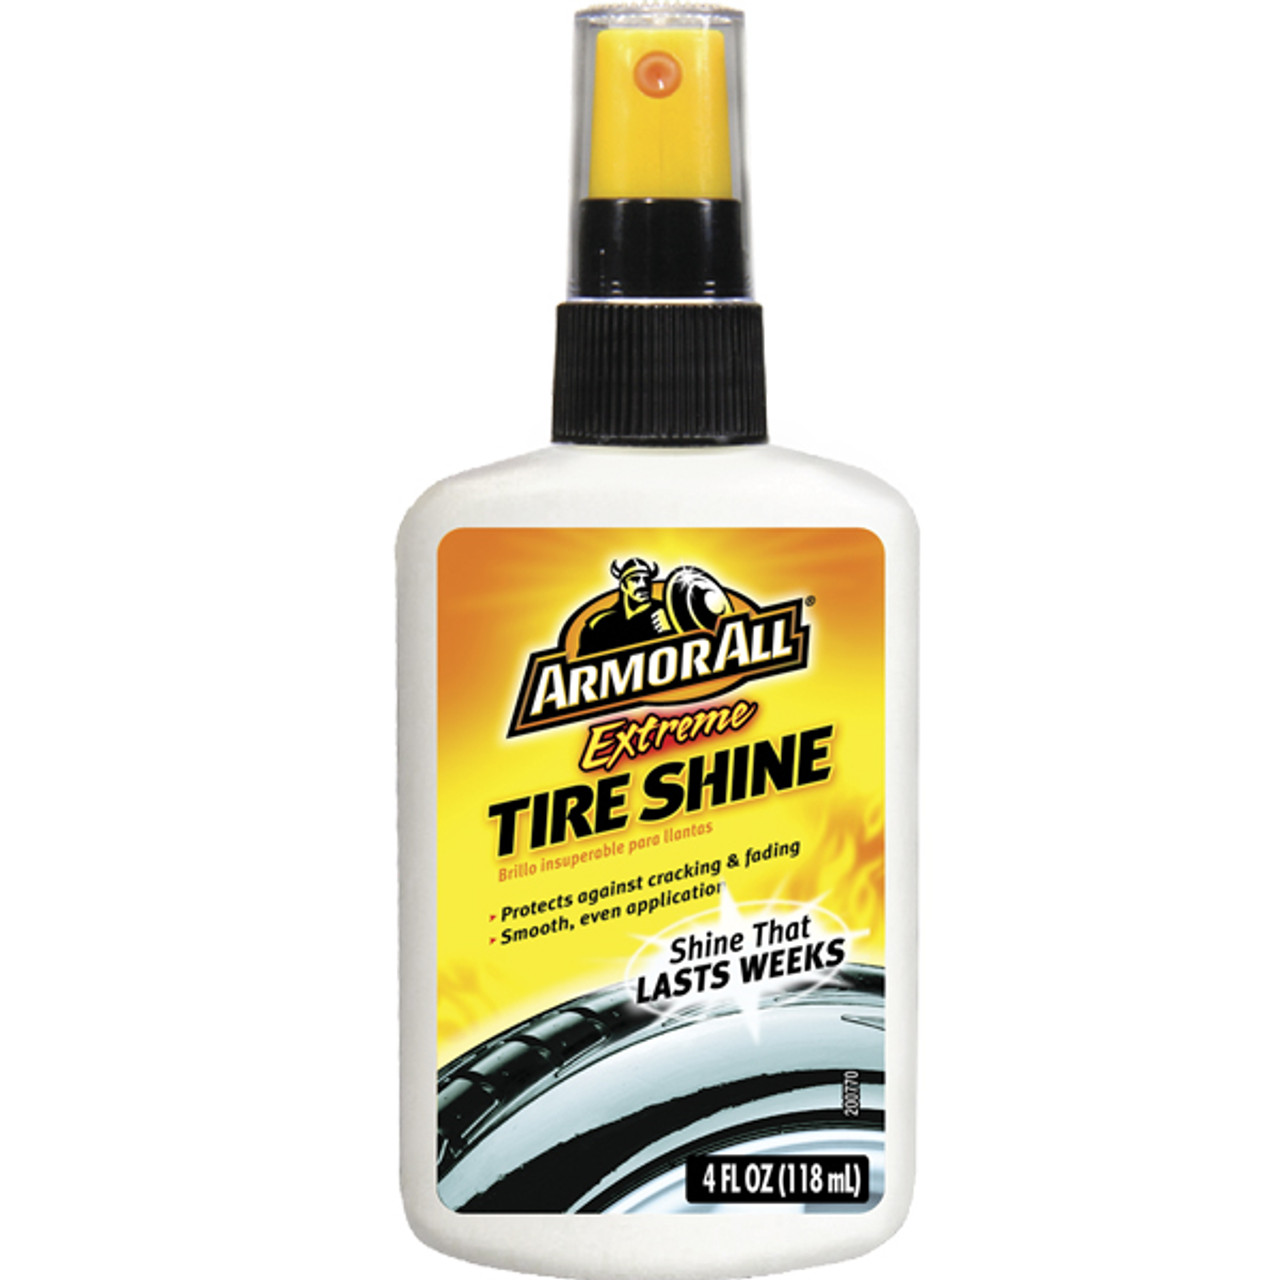  Armor All Tire Foam, Tire Cleaner Spray for Cars, Trucks,  Motorcycles, 20 Oz Each, 1.25 Pound (Pack of 1) : Automotive